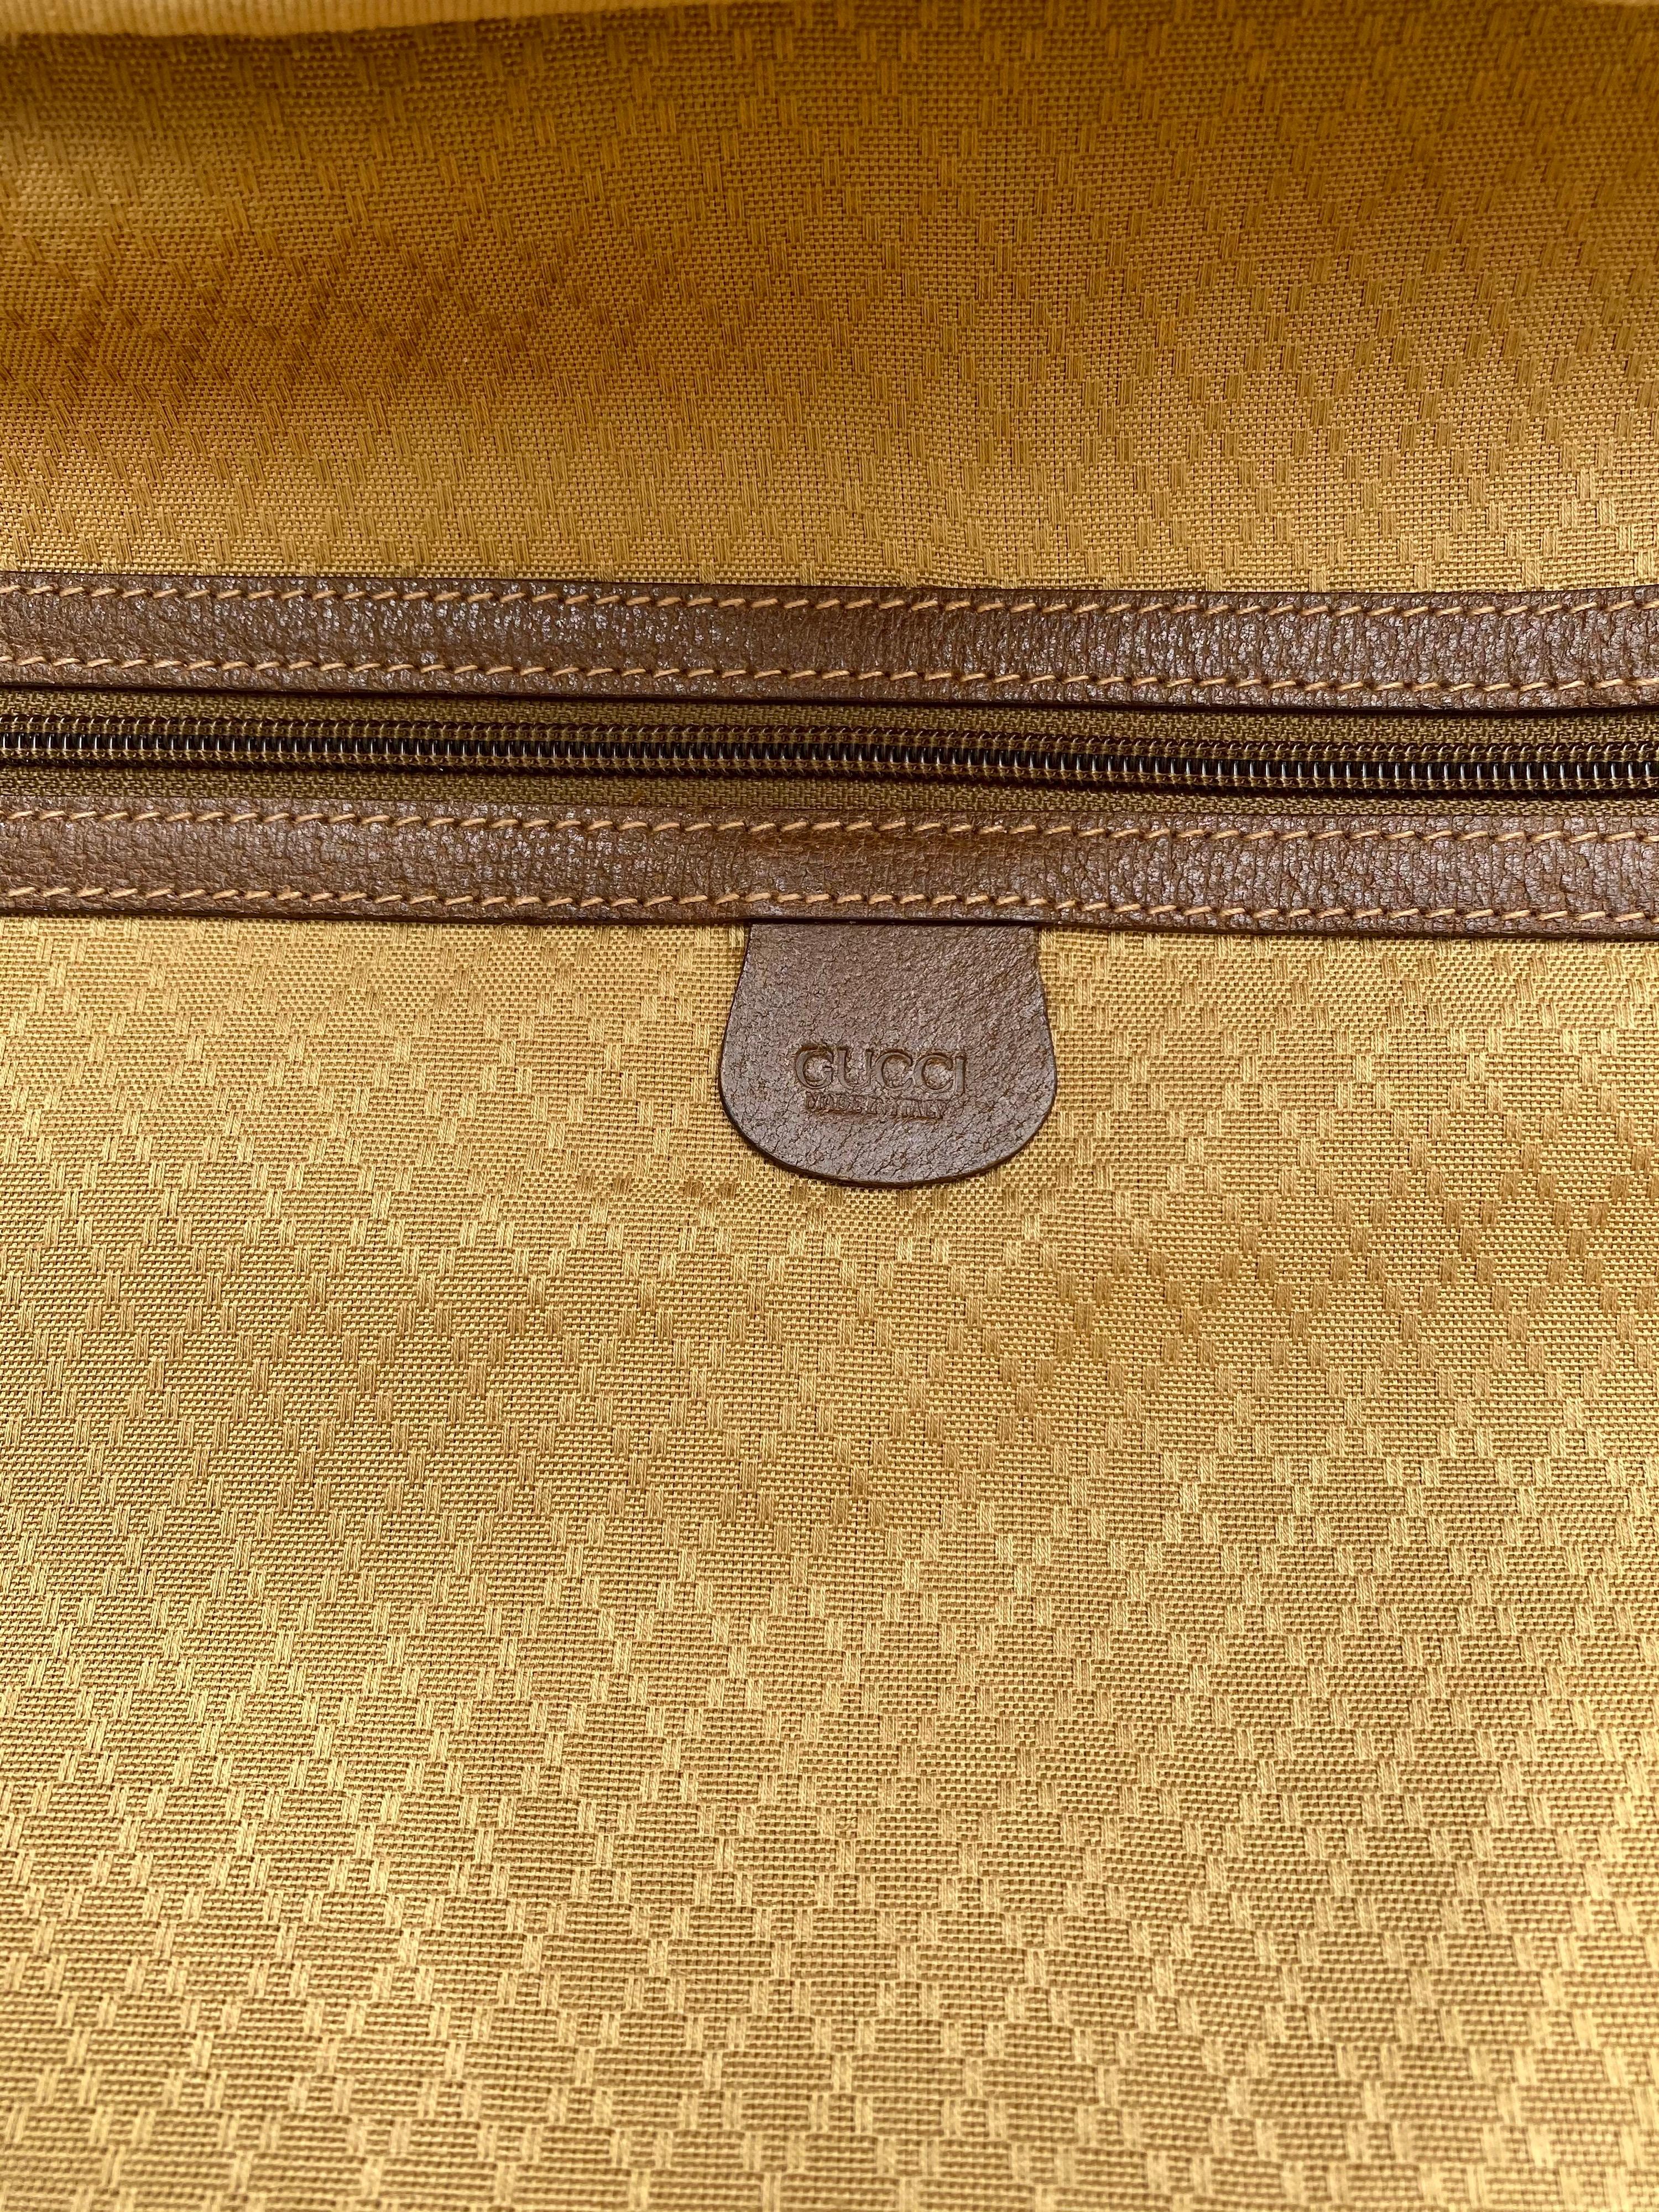 Gucci Vintage Rare GG Monogram Suitcase Travel Luggage For Sale 5